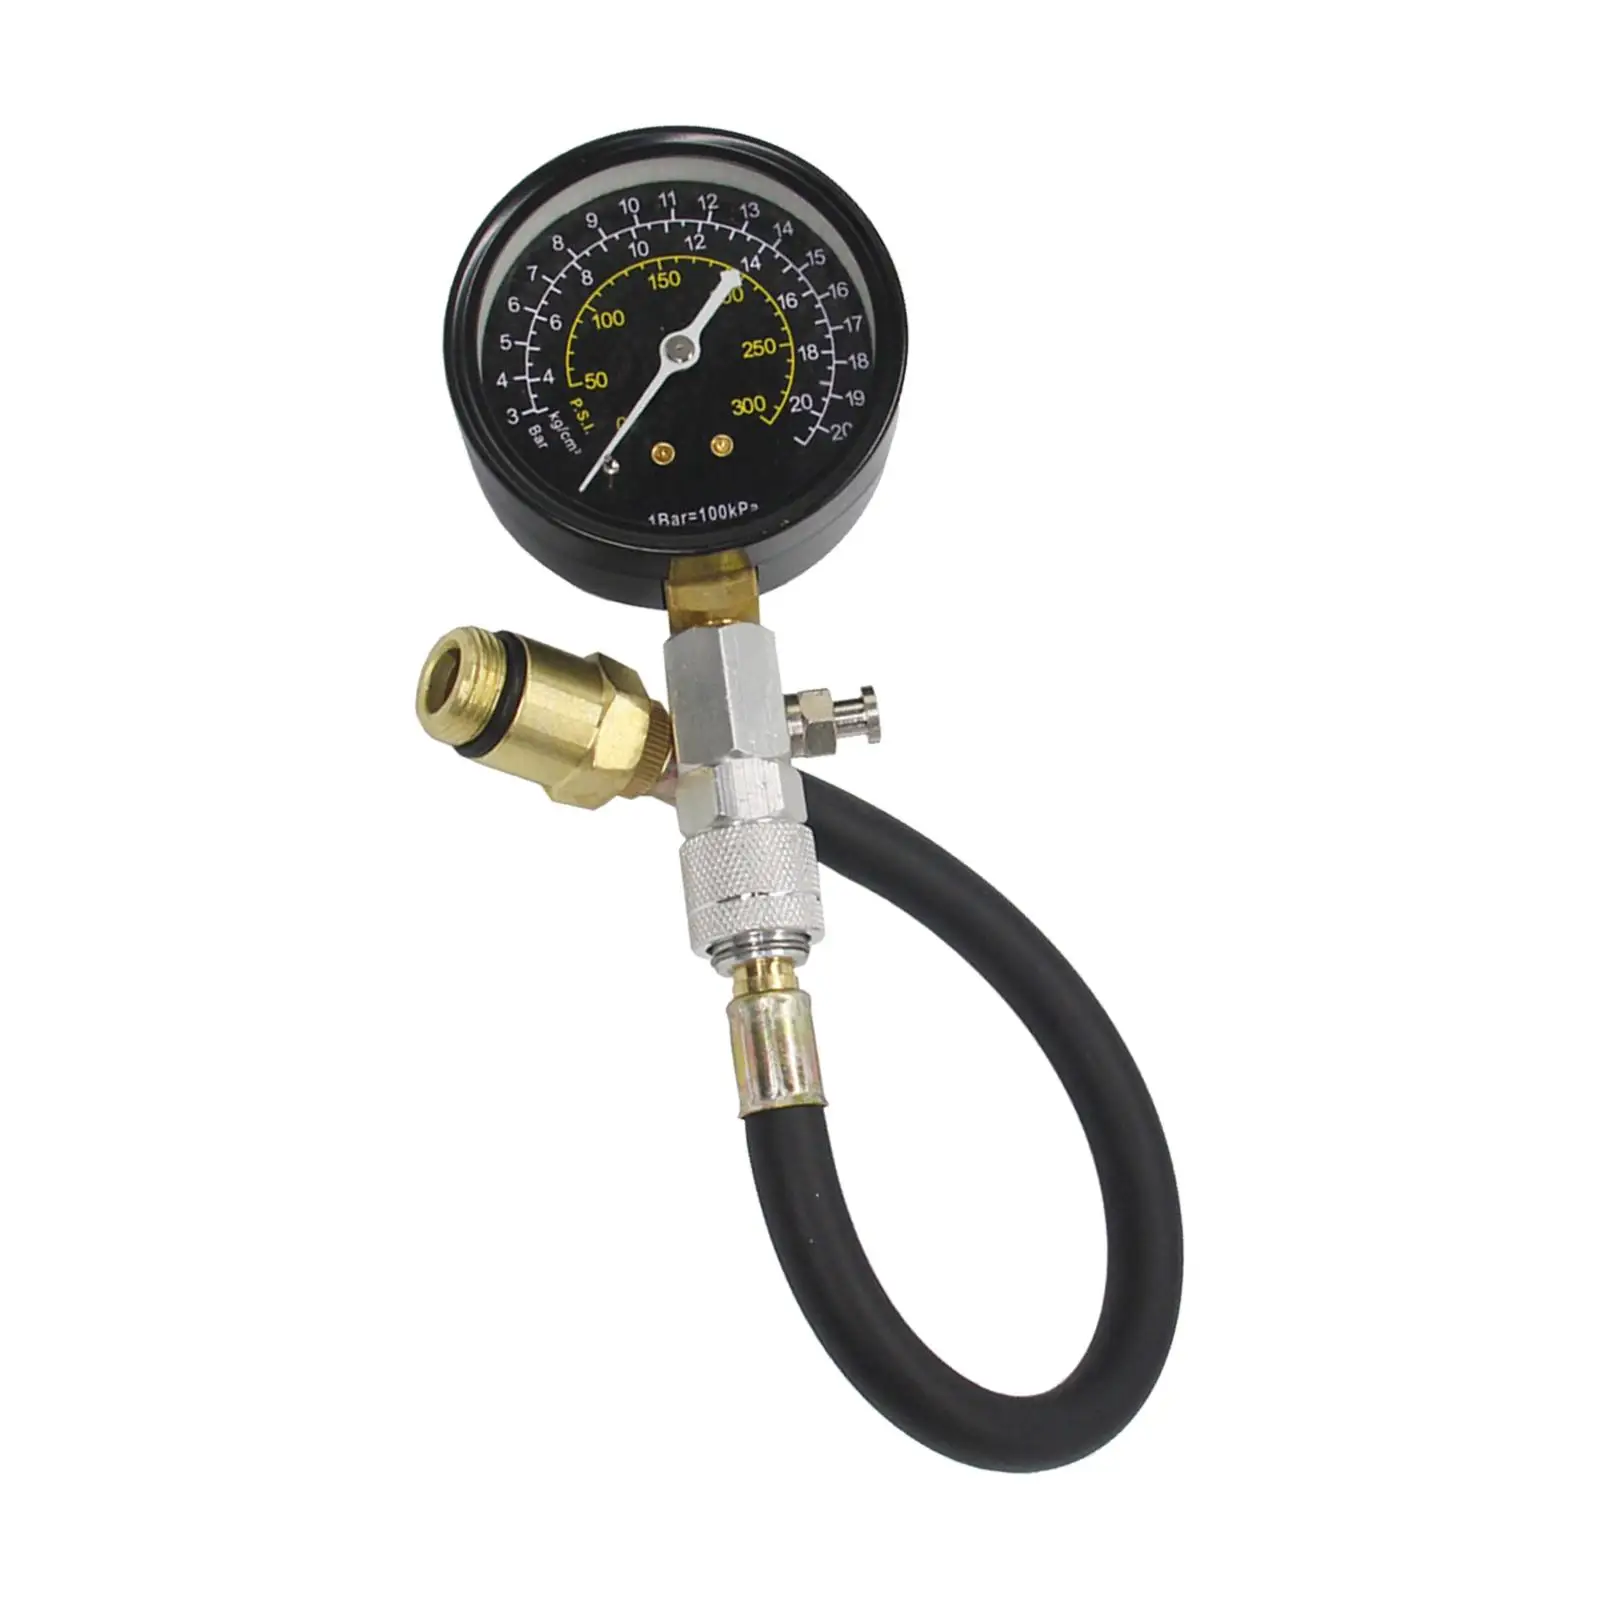 Compression Kit 300 PSI Check Test Meter Auto 2000Kpa Pressure for Motorcycle Gasoline Engines Car Truck